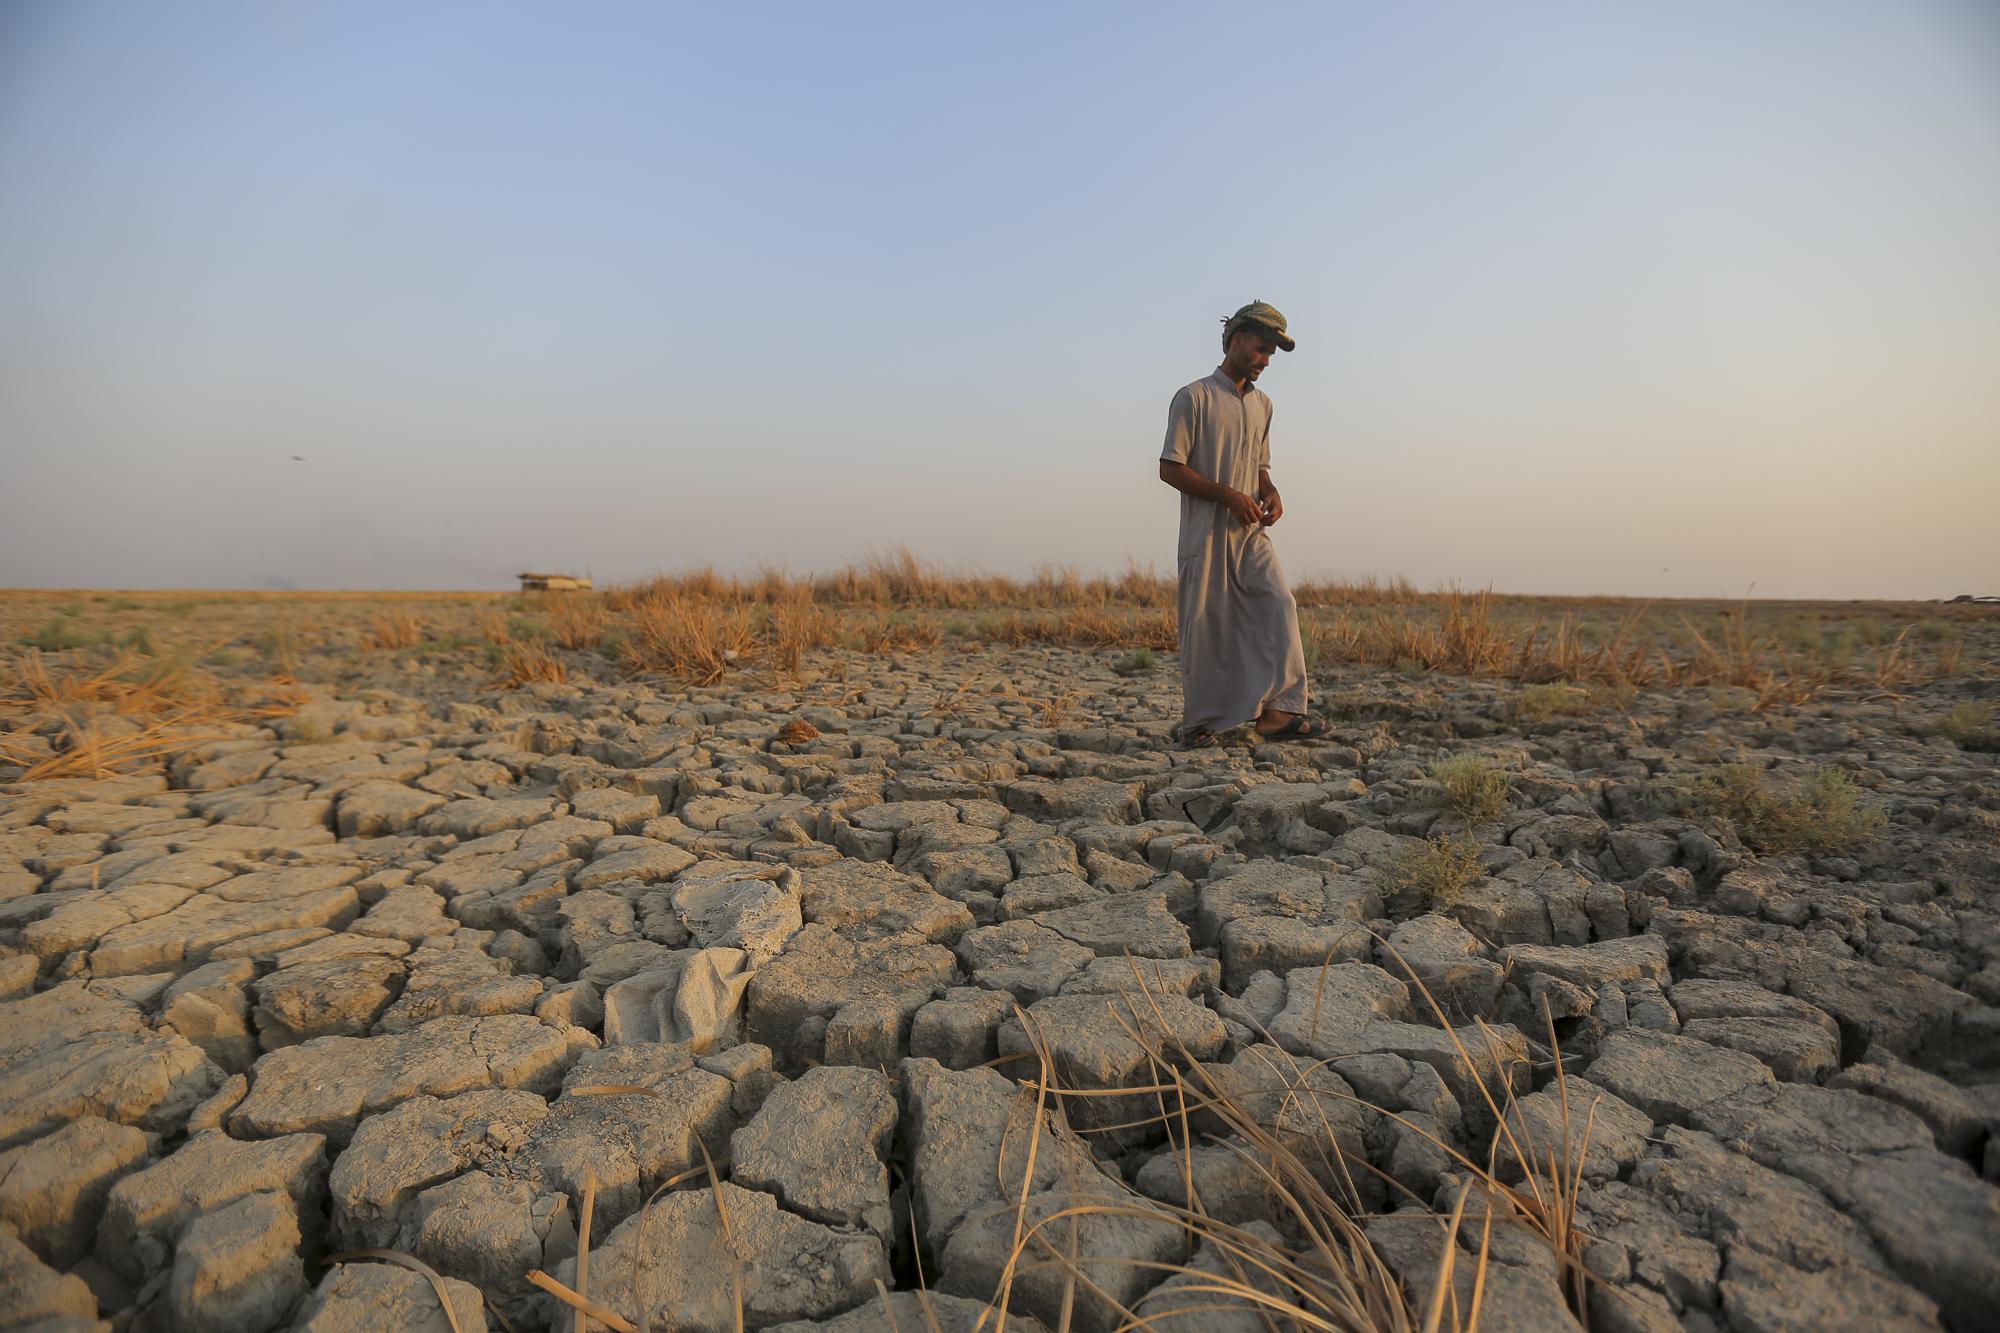 A fisherman walks across a dry patch of land in the marshes of southern Iraq which has suffered dire consequences from back-to-back drought and rising salinity levels, in Dhi Qar province, Iraq, Friday, 2 September 2022. Photo: Anmar Khalil / AP Photo